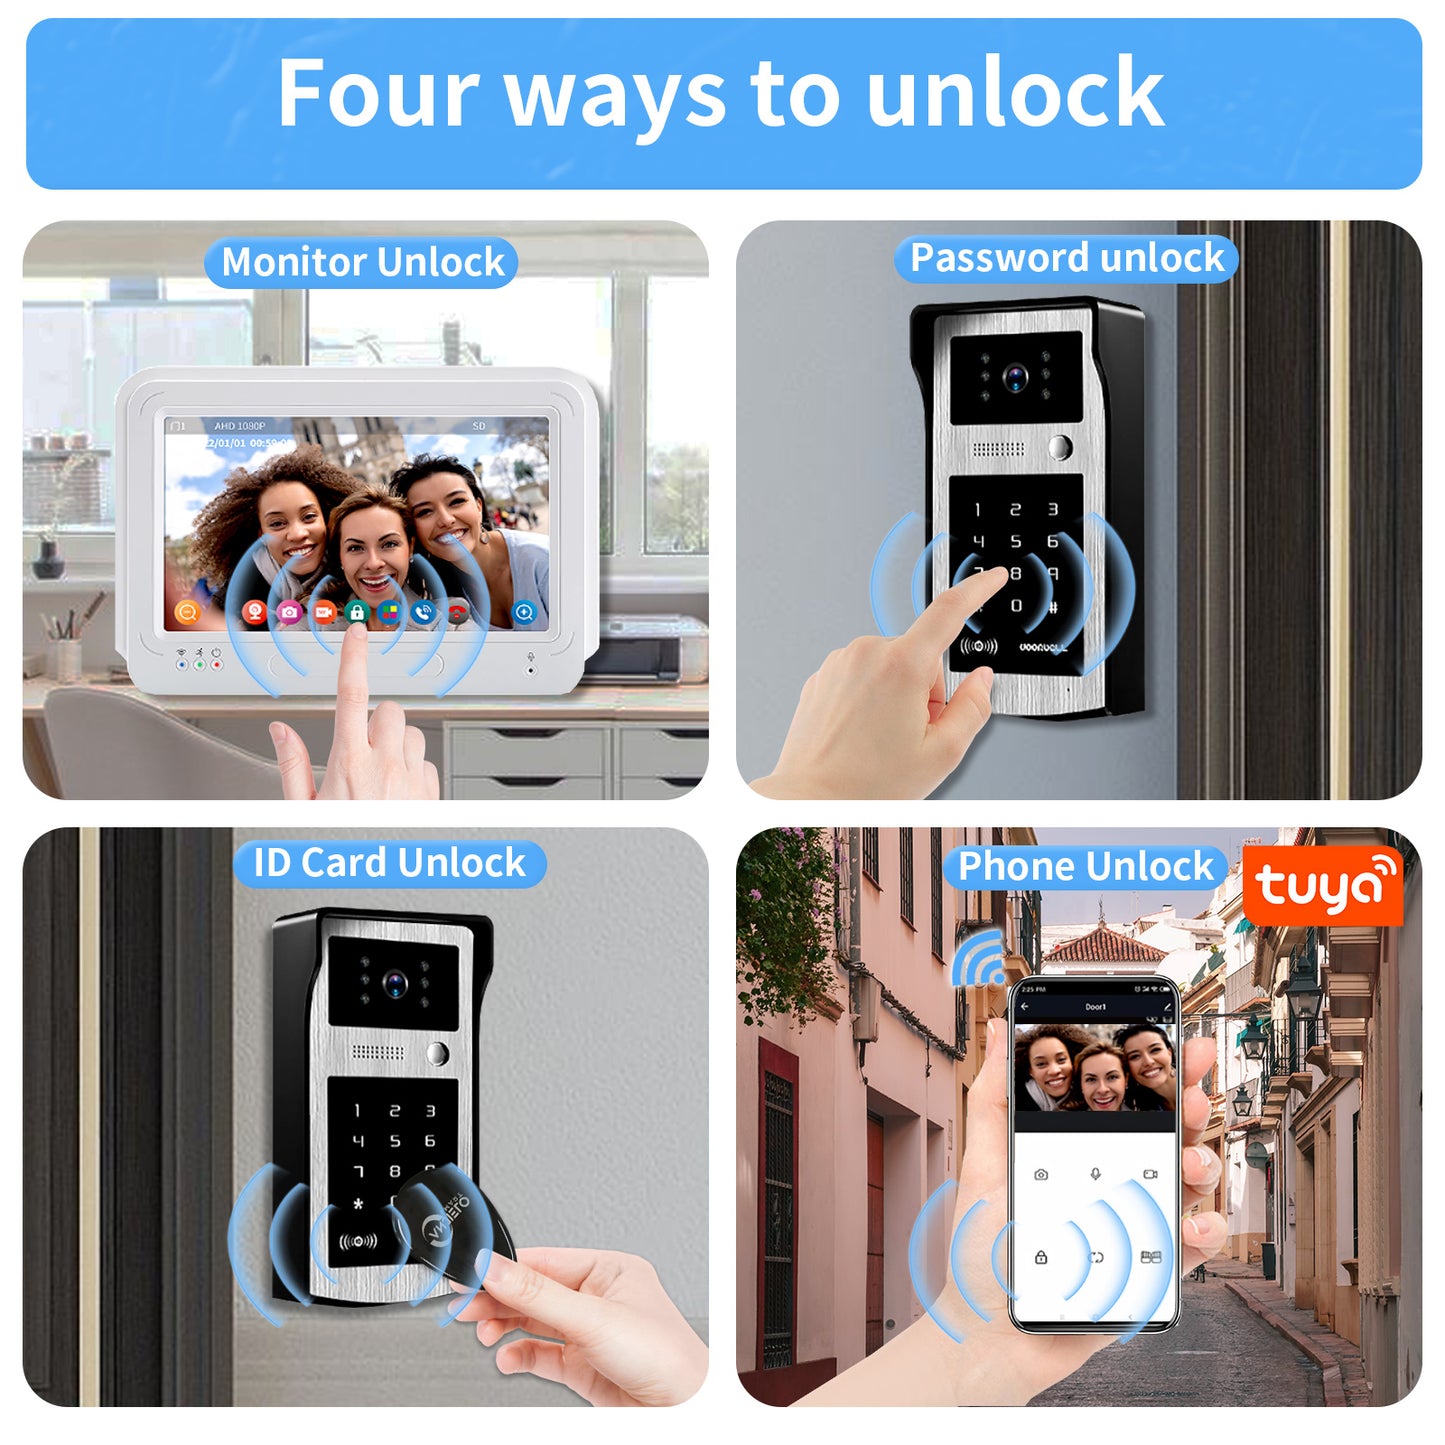 7 Inch Screen Touch Monitor Video Intercom for Home Door Phone Doorbell with RFID Code Keypad Access Control Video intercom System